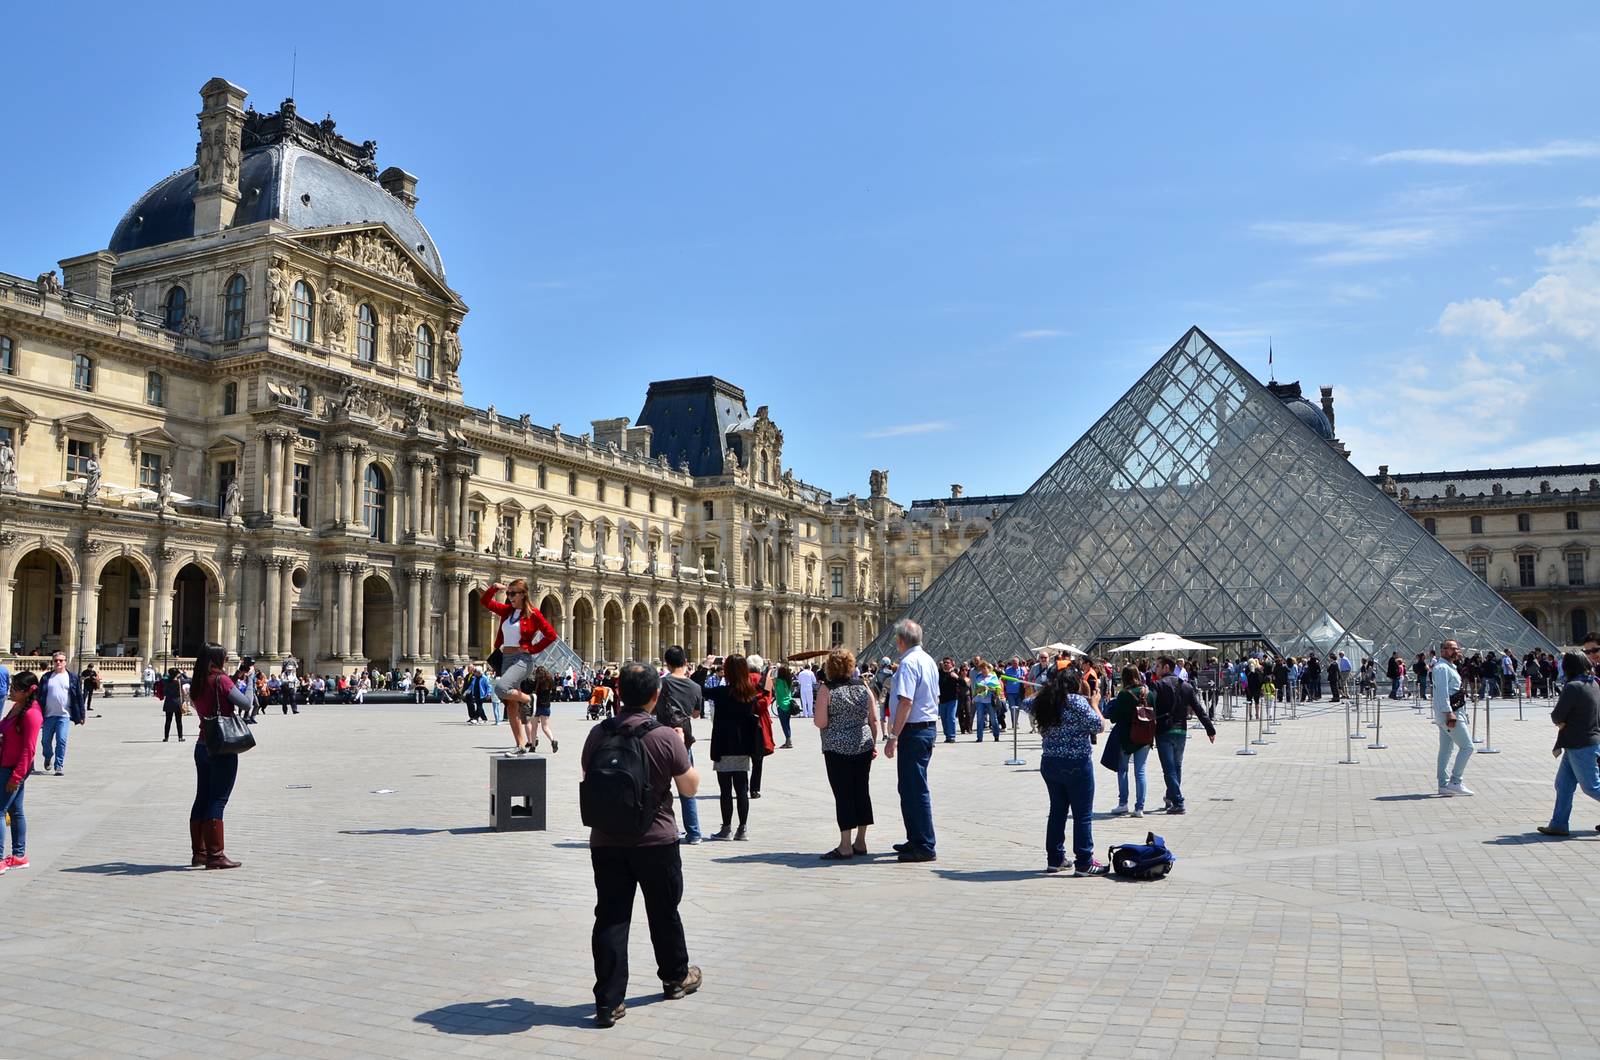 Paris, France - May 13, 2015: Tourist visit Louvre museum on May 13, 2015 in Paris. This is one of the most popular tourist destinations in France.